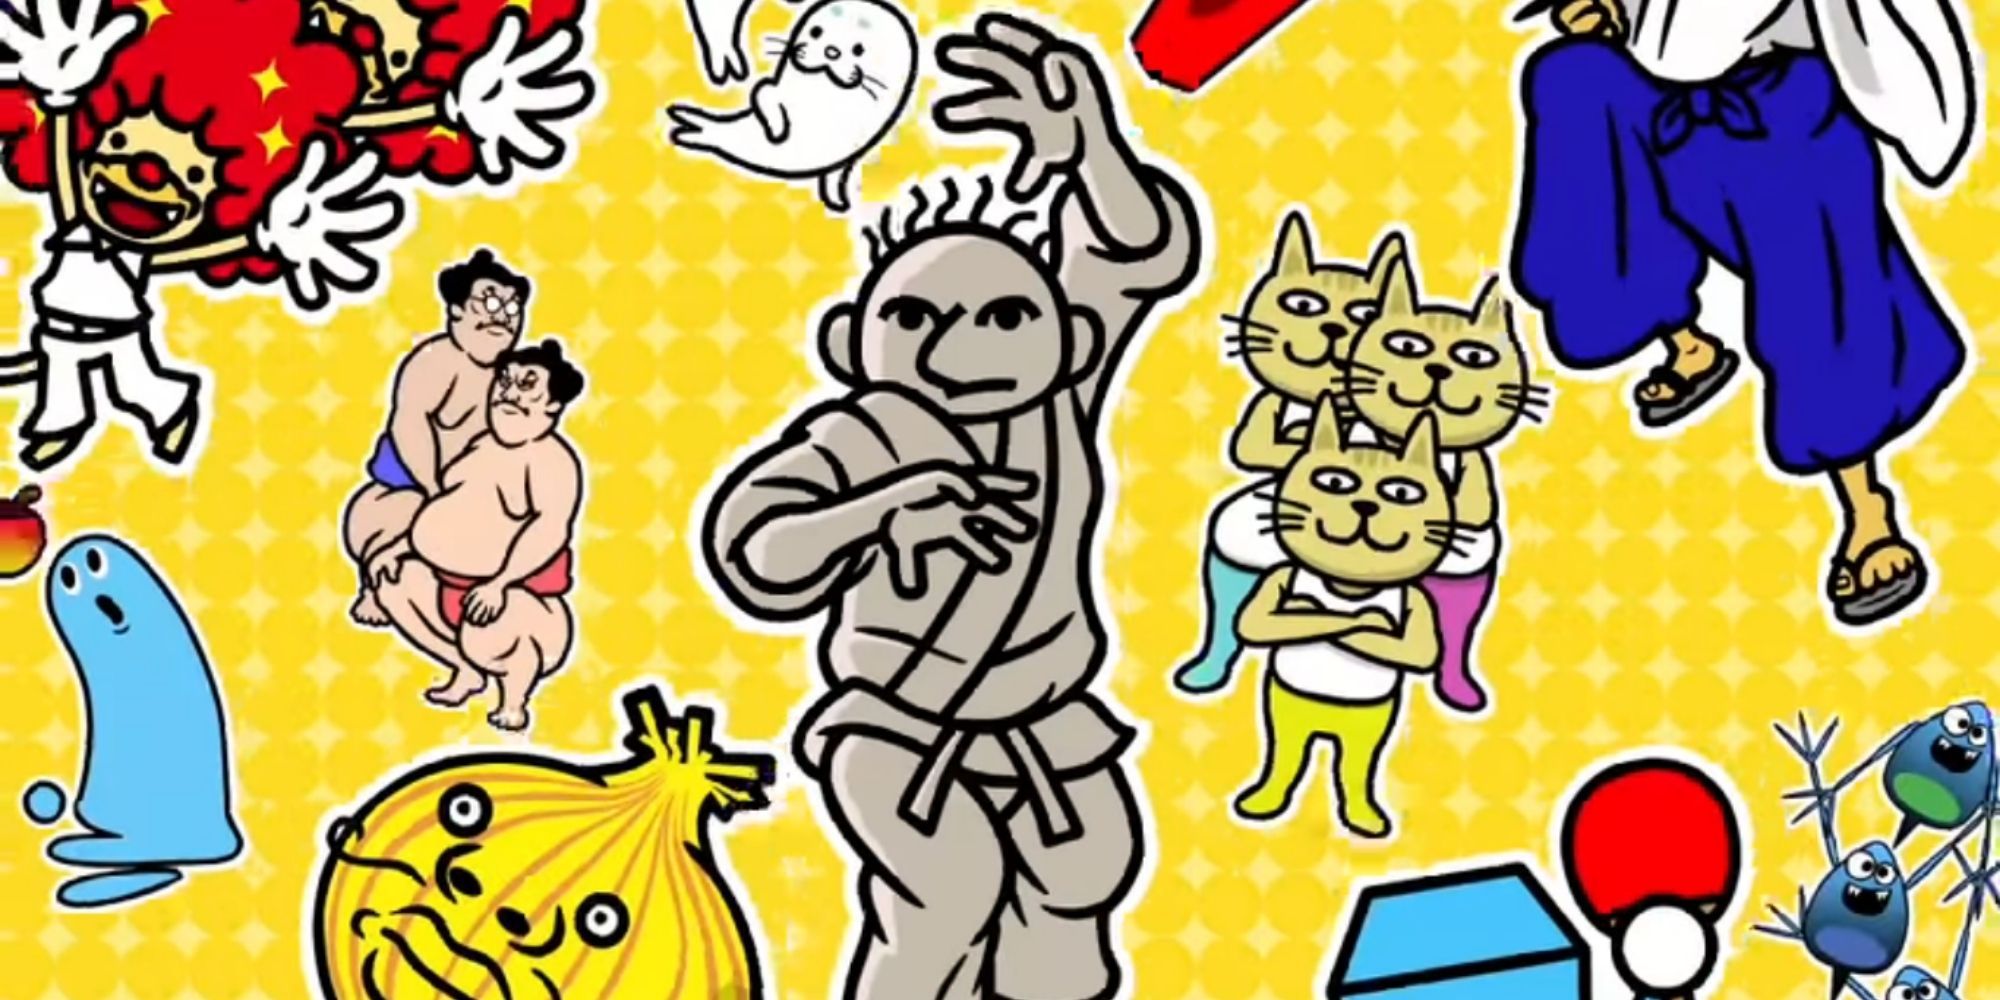 Karate Joe, Lumbercats, a Hair Vegetable, and more characters from Rhythm Heaven